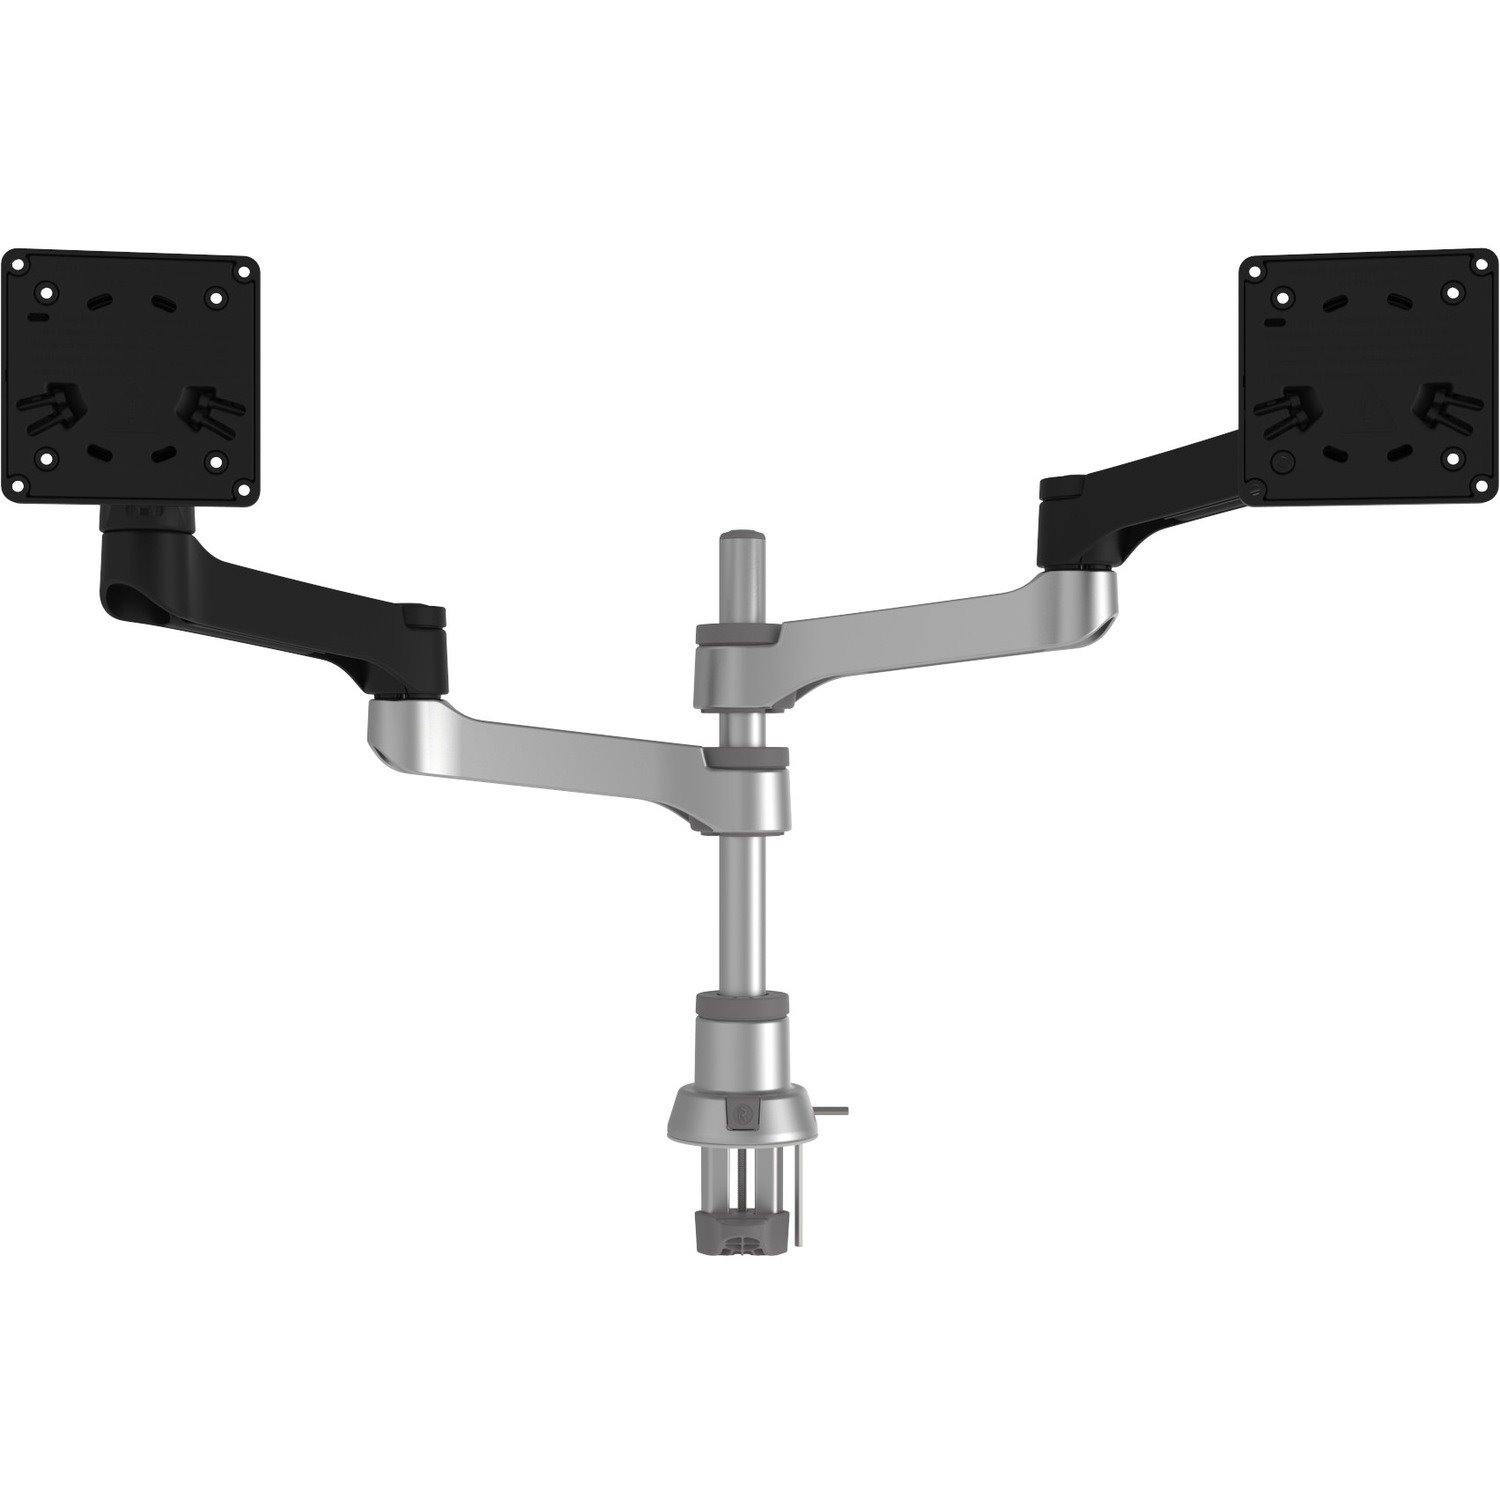 R-Go Zepher 4 Mounting Arm for Monitor - Matte Silver